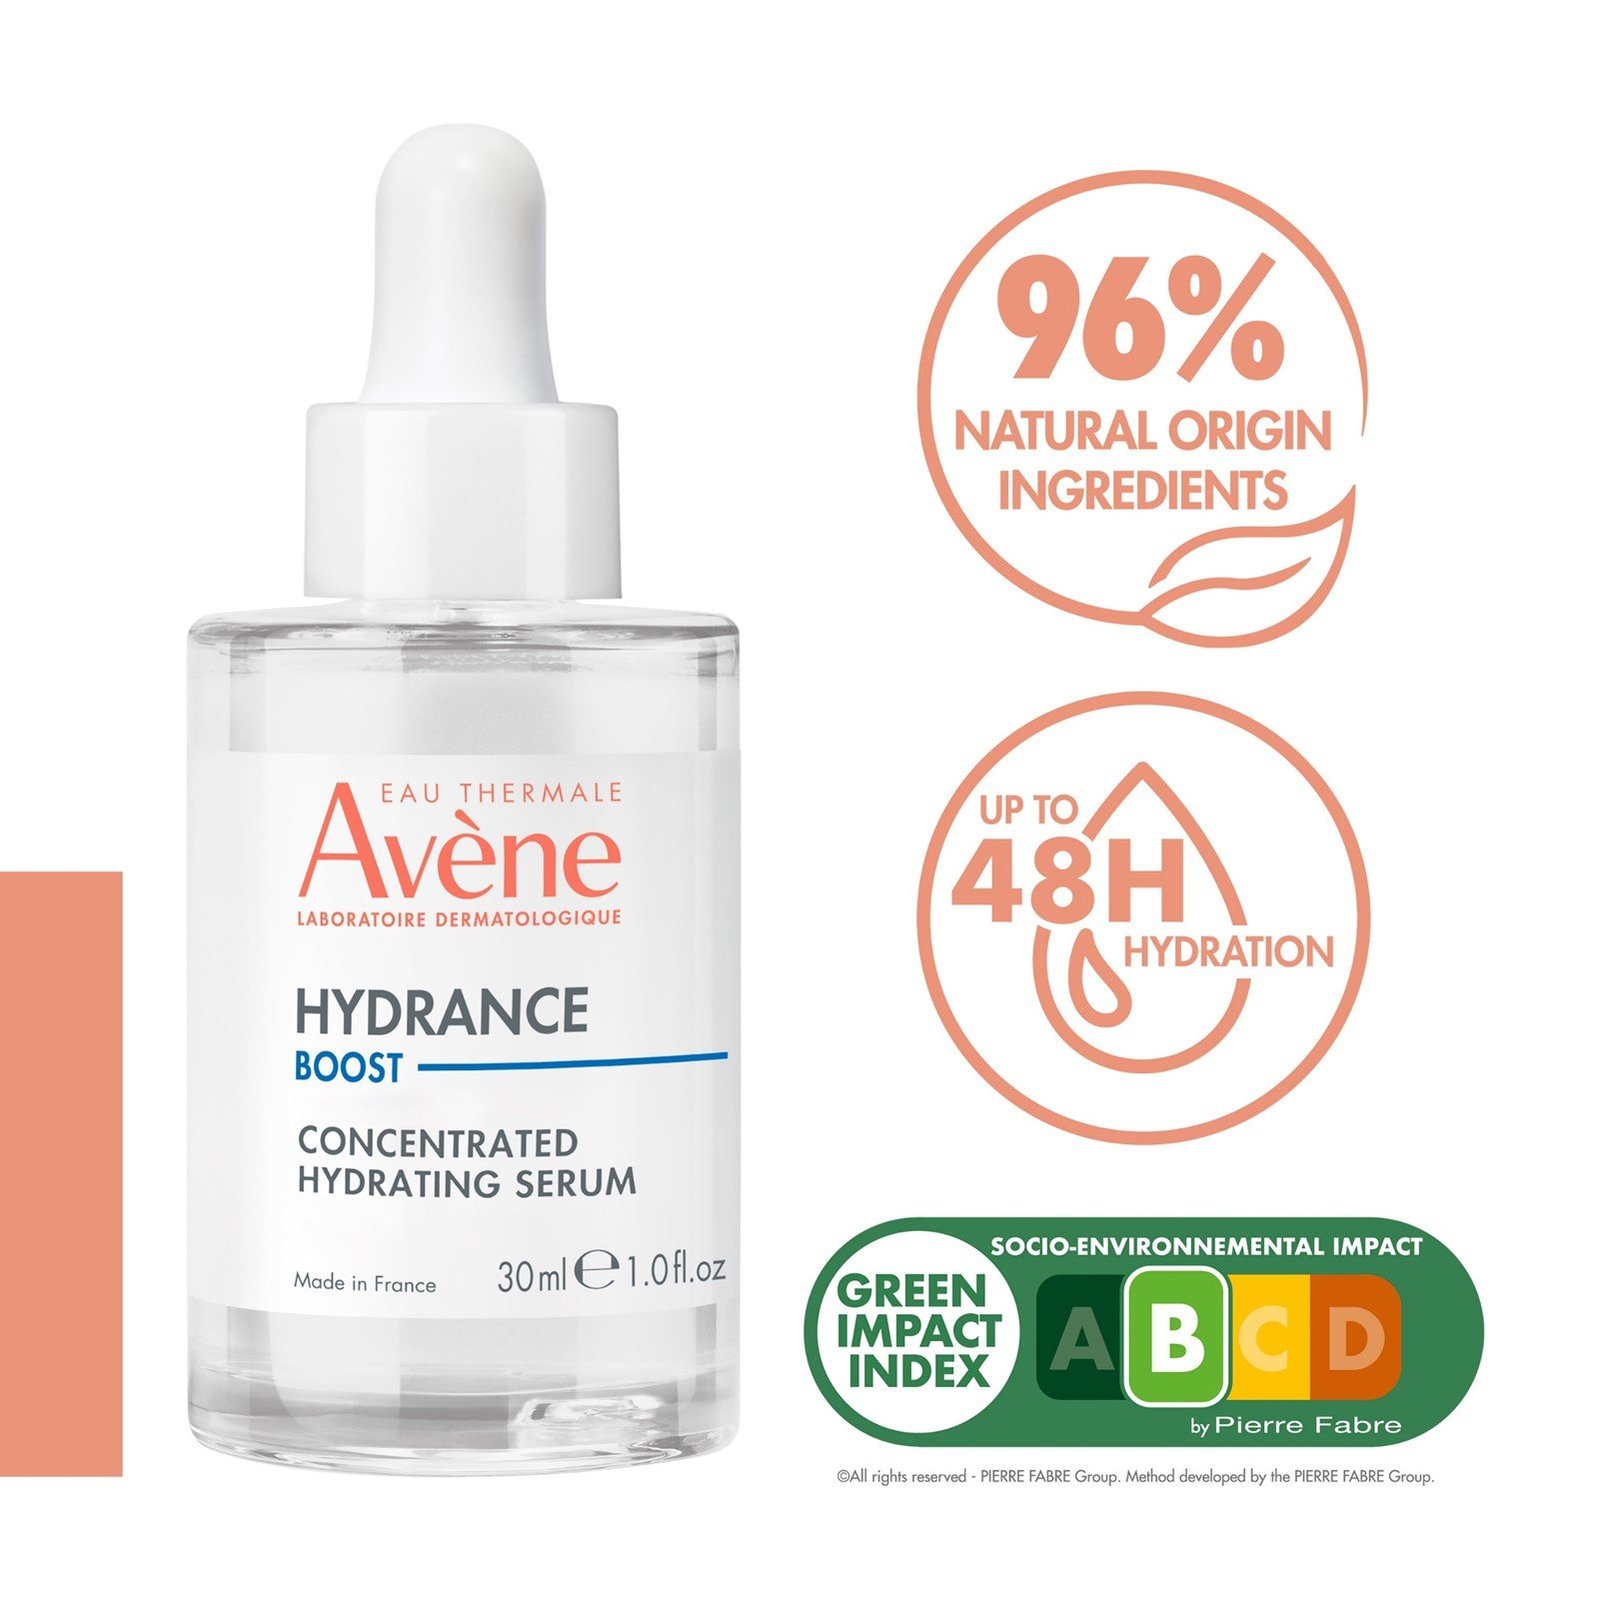 https://static.beautytocare.com/cdn-cgi/image/width=1600,height=1600,f=auto/media/catalog/product//a/v/avene-hydrance-boost-concentrated-hydrating-serum-30ml_5.jpg